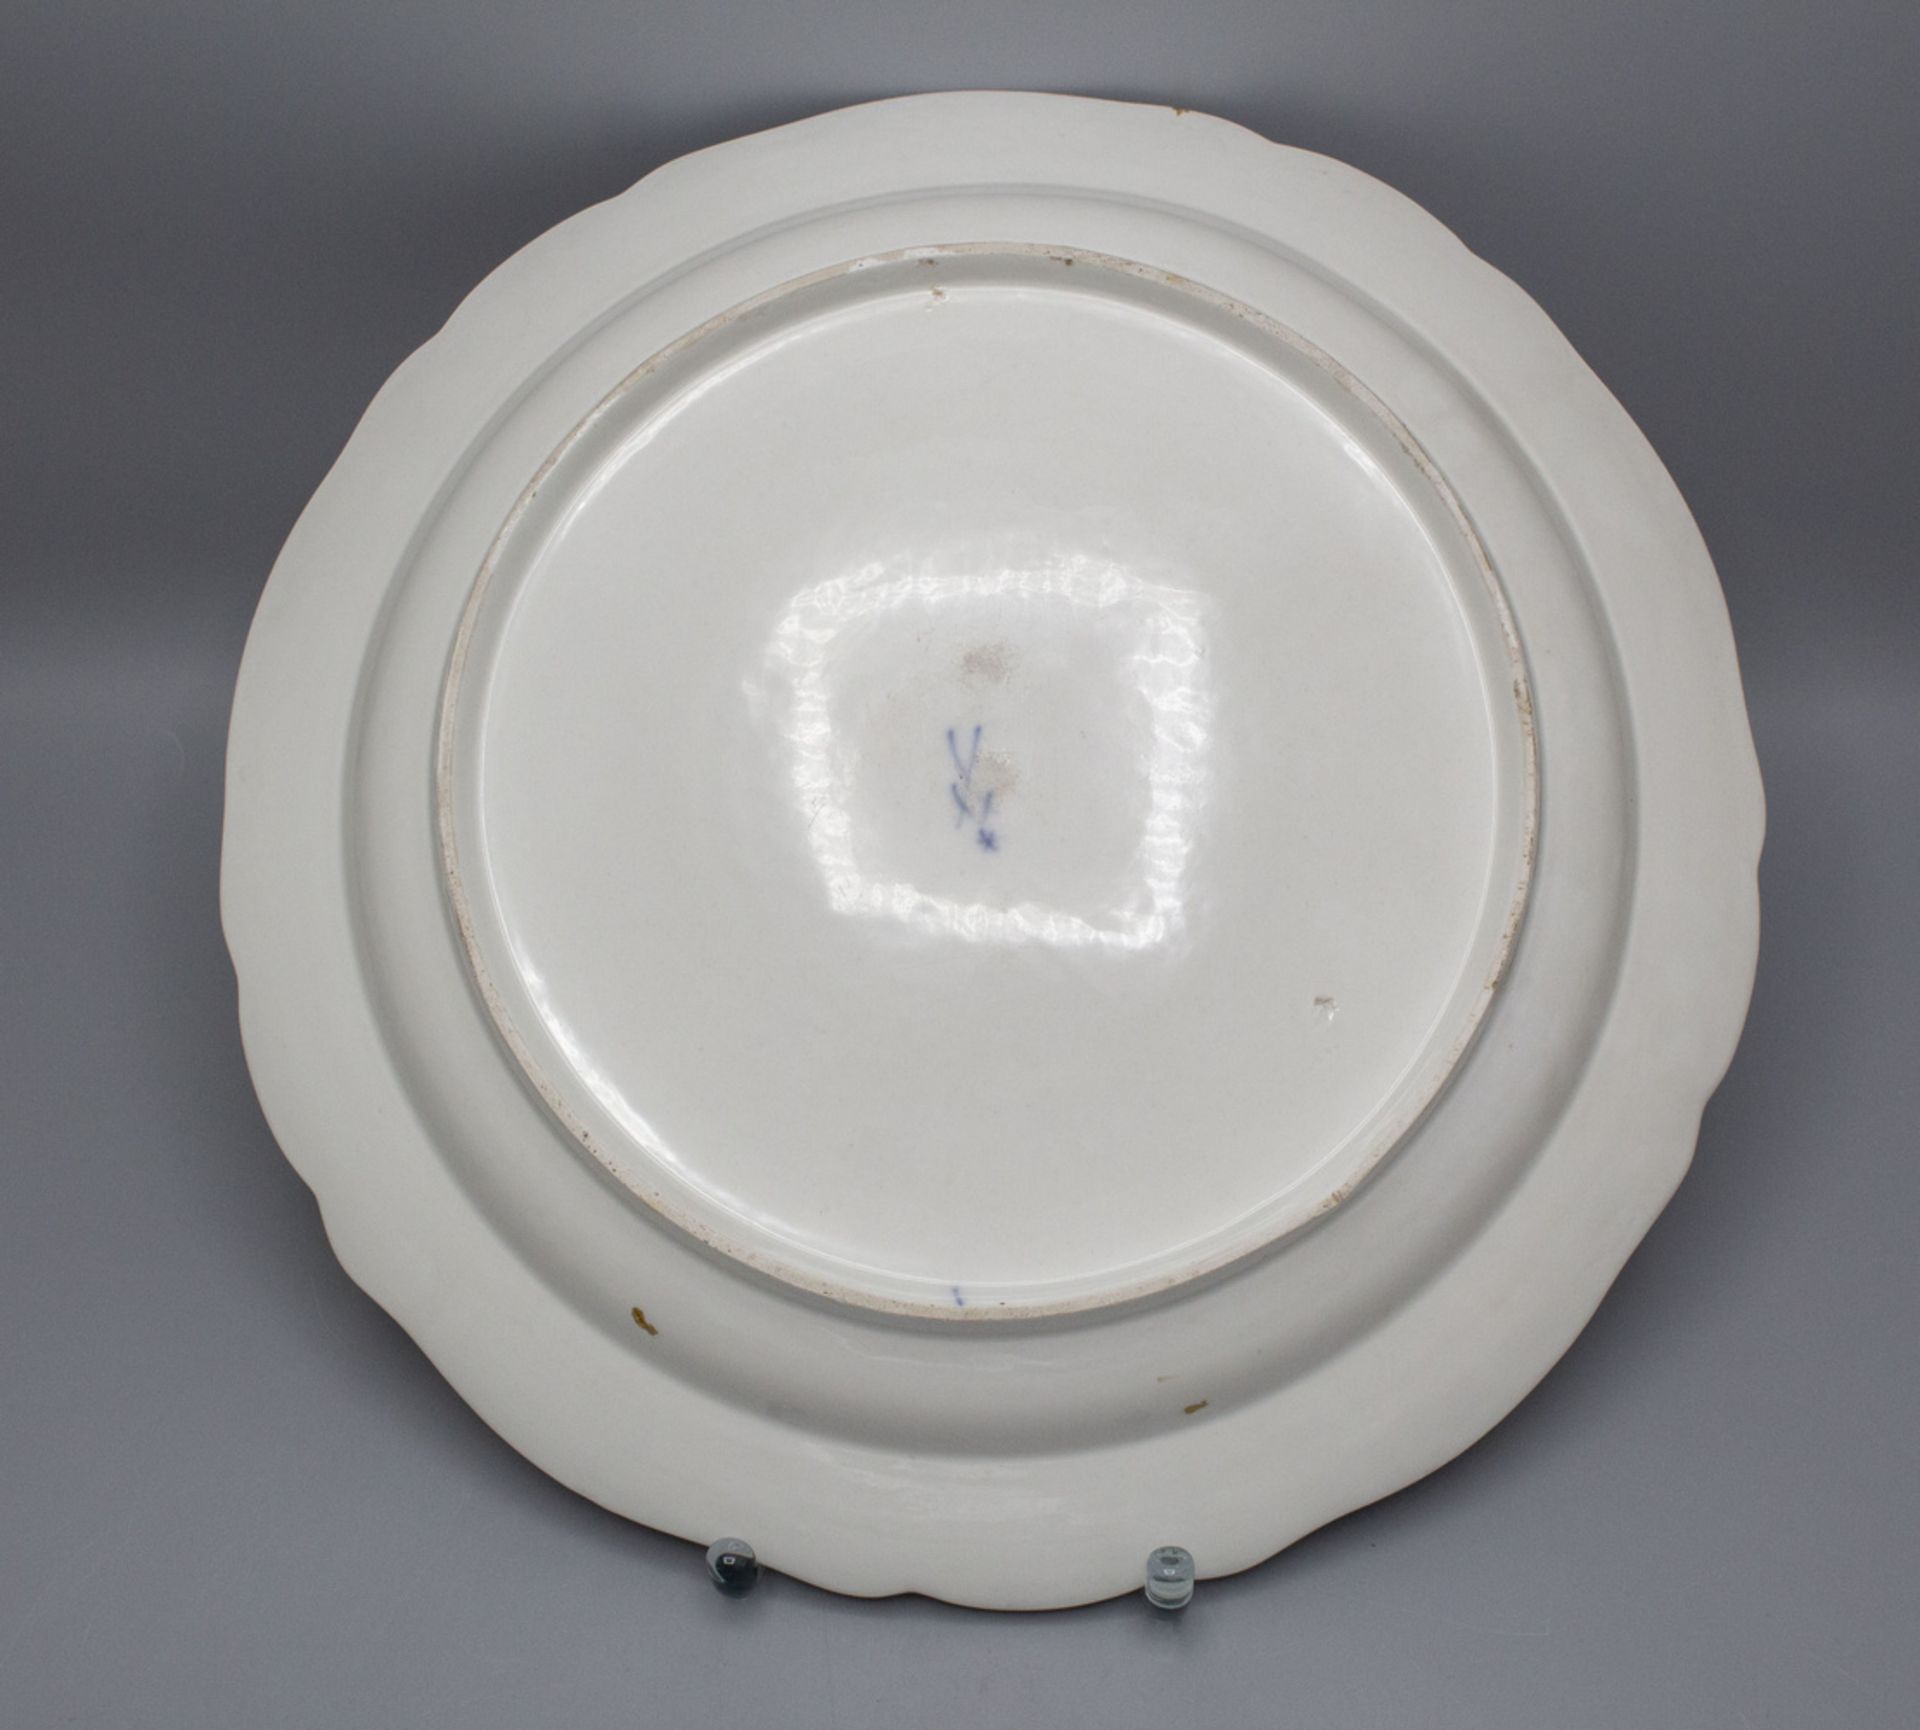 2 große Teller / 2 large plates, Meissen, Marcolini-Periode, 1774-1814 - Image 3 of 6